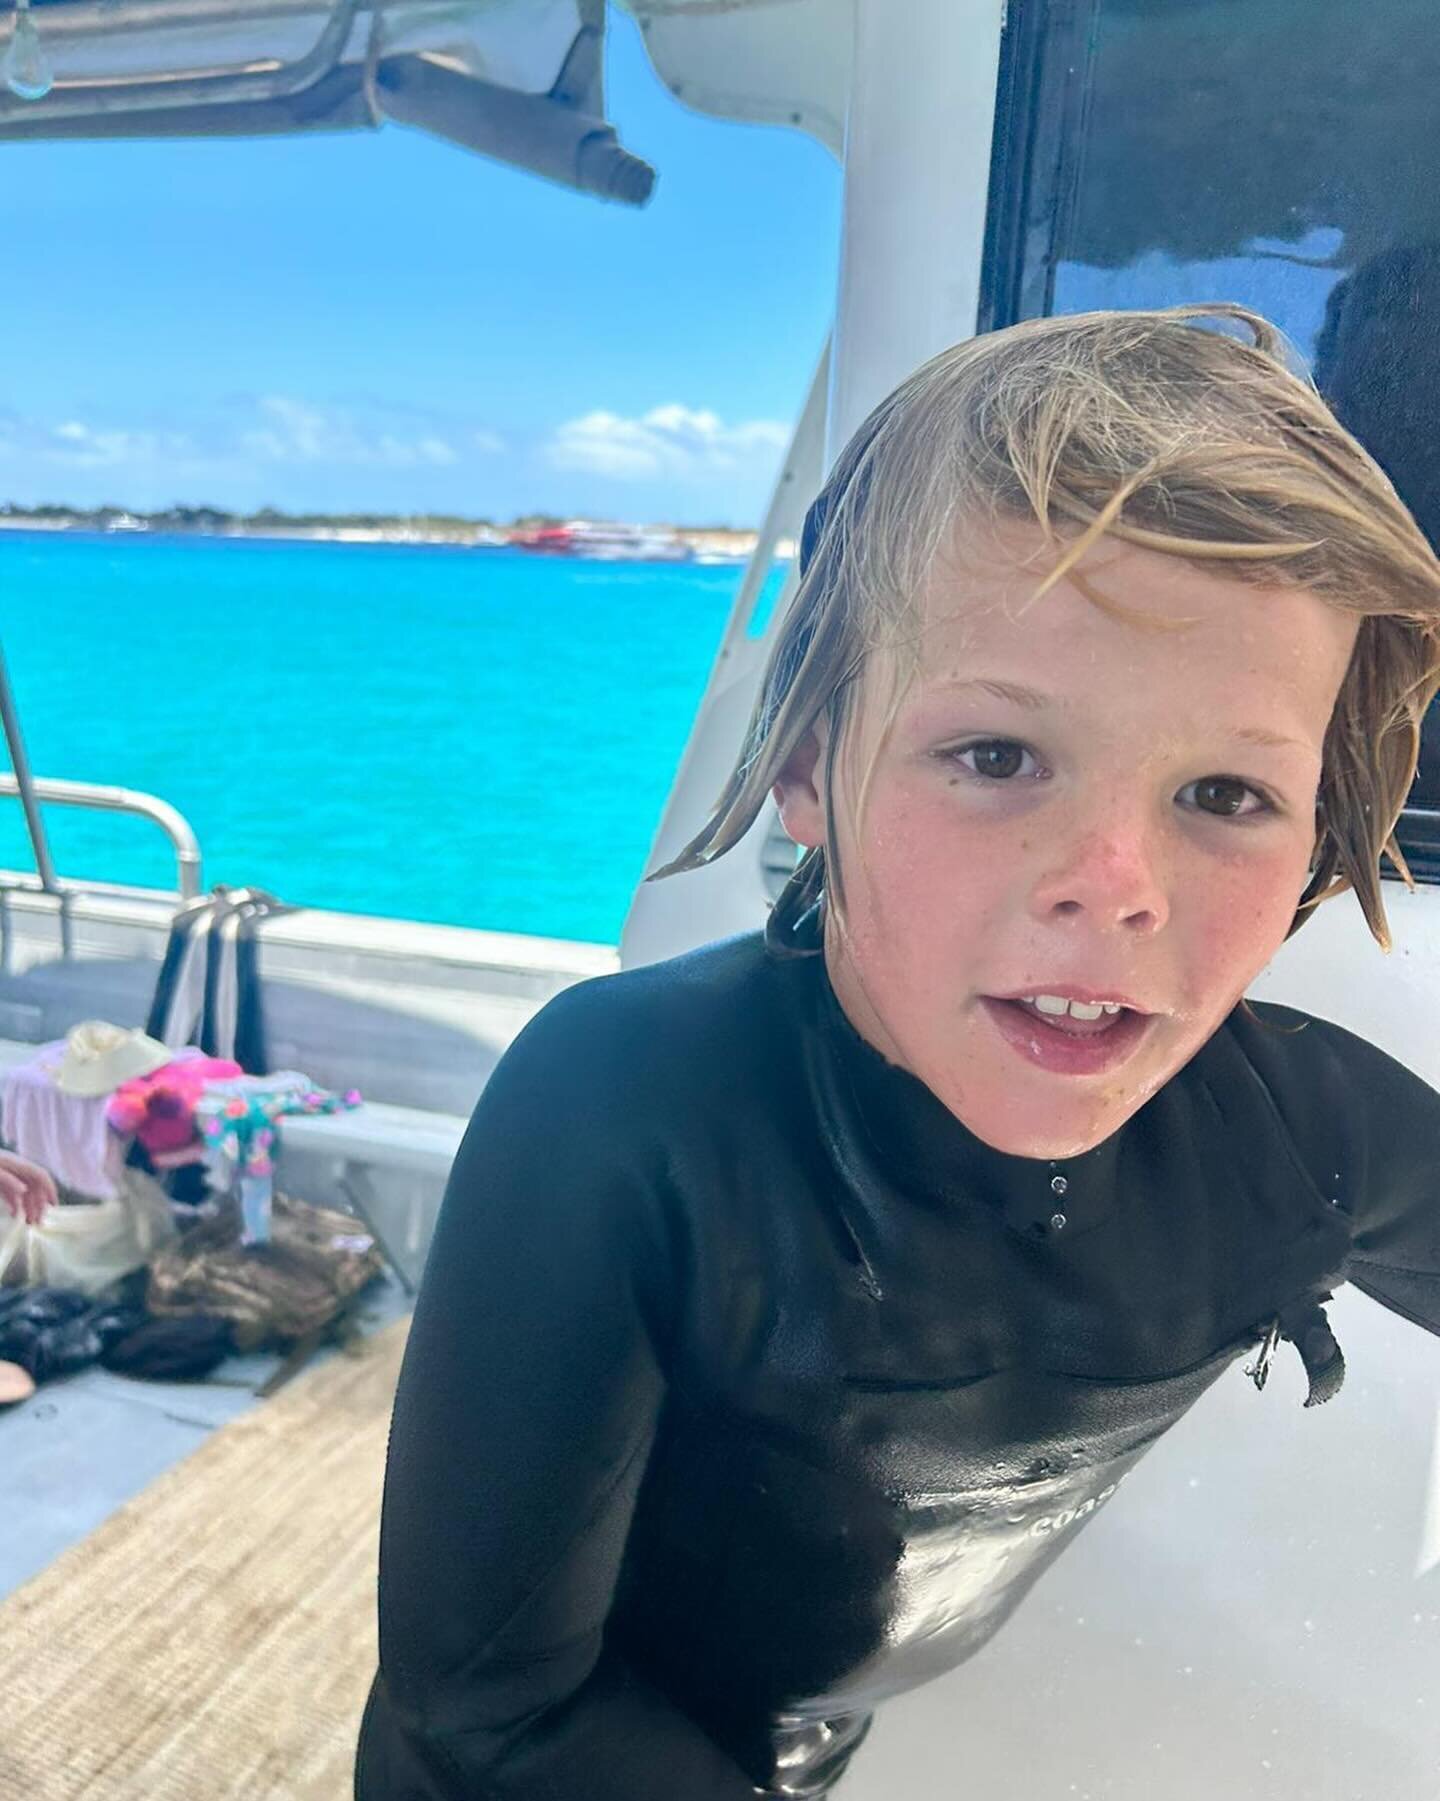 &ldquo;Tommy Turbo&rdquo; turns 10 🥳
The youngest member of the Due West team celebrated on board with mates. What a day of surfing, boat jumps, kayaking etc. everyone was suitably shattered that evening 🤣👍